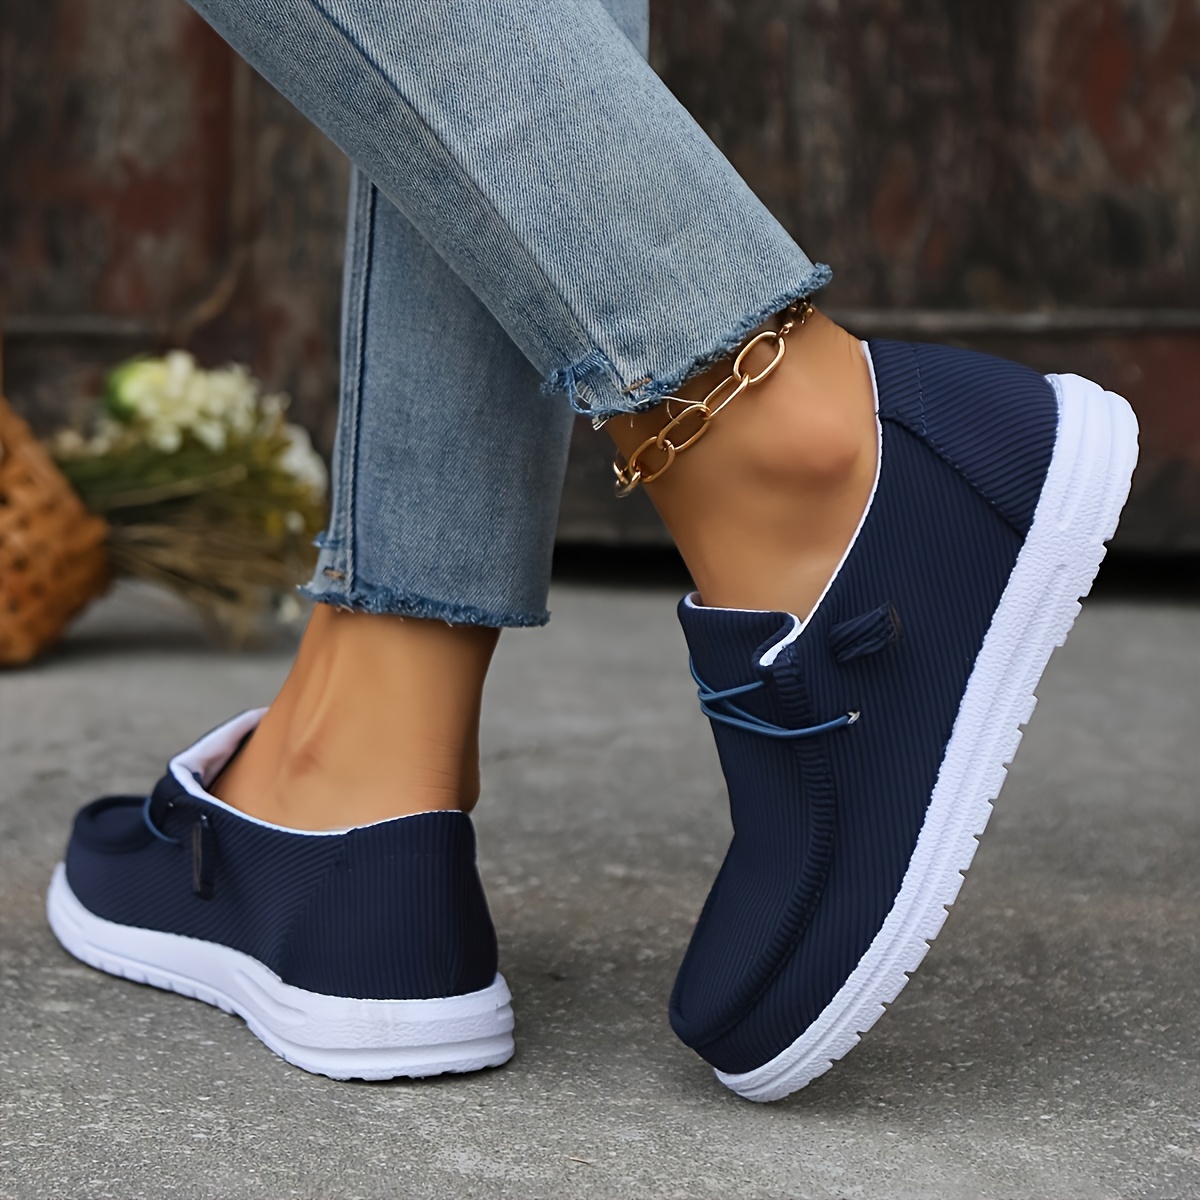 Women s Solid Color Casual Sneakers, Slip On Lightweight Soft Sole Walking Shoes, Low-top Comfort Daily Footwear details 2